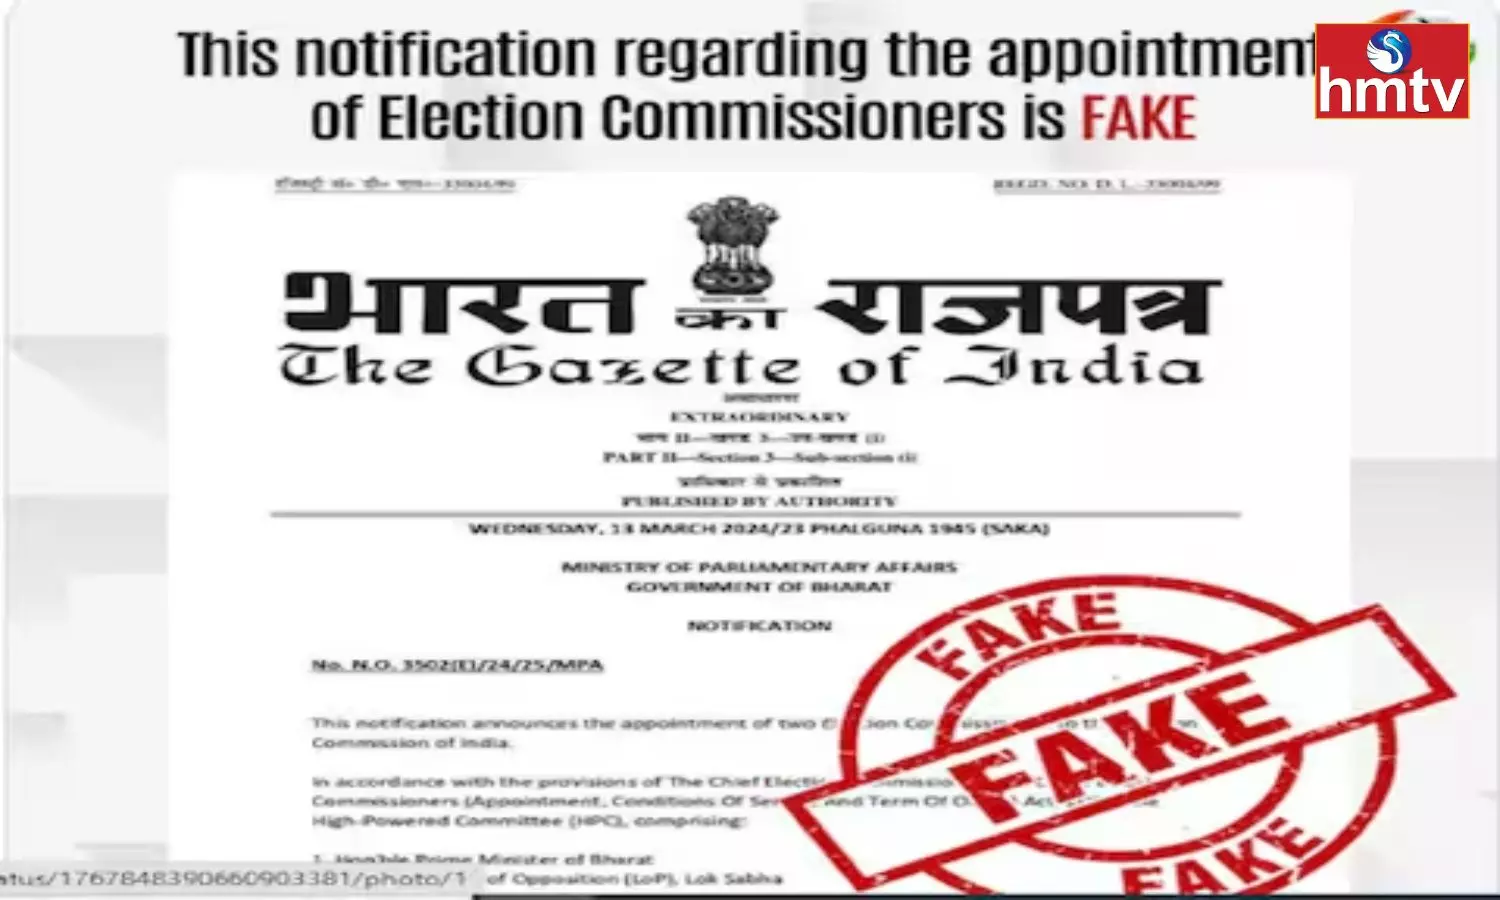 Fake Campaign On Appointment Of Election Commissioners